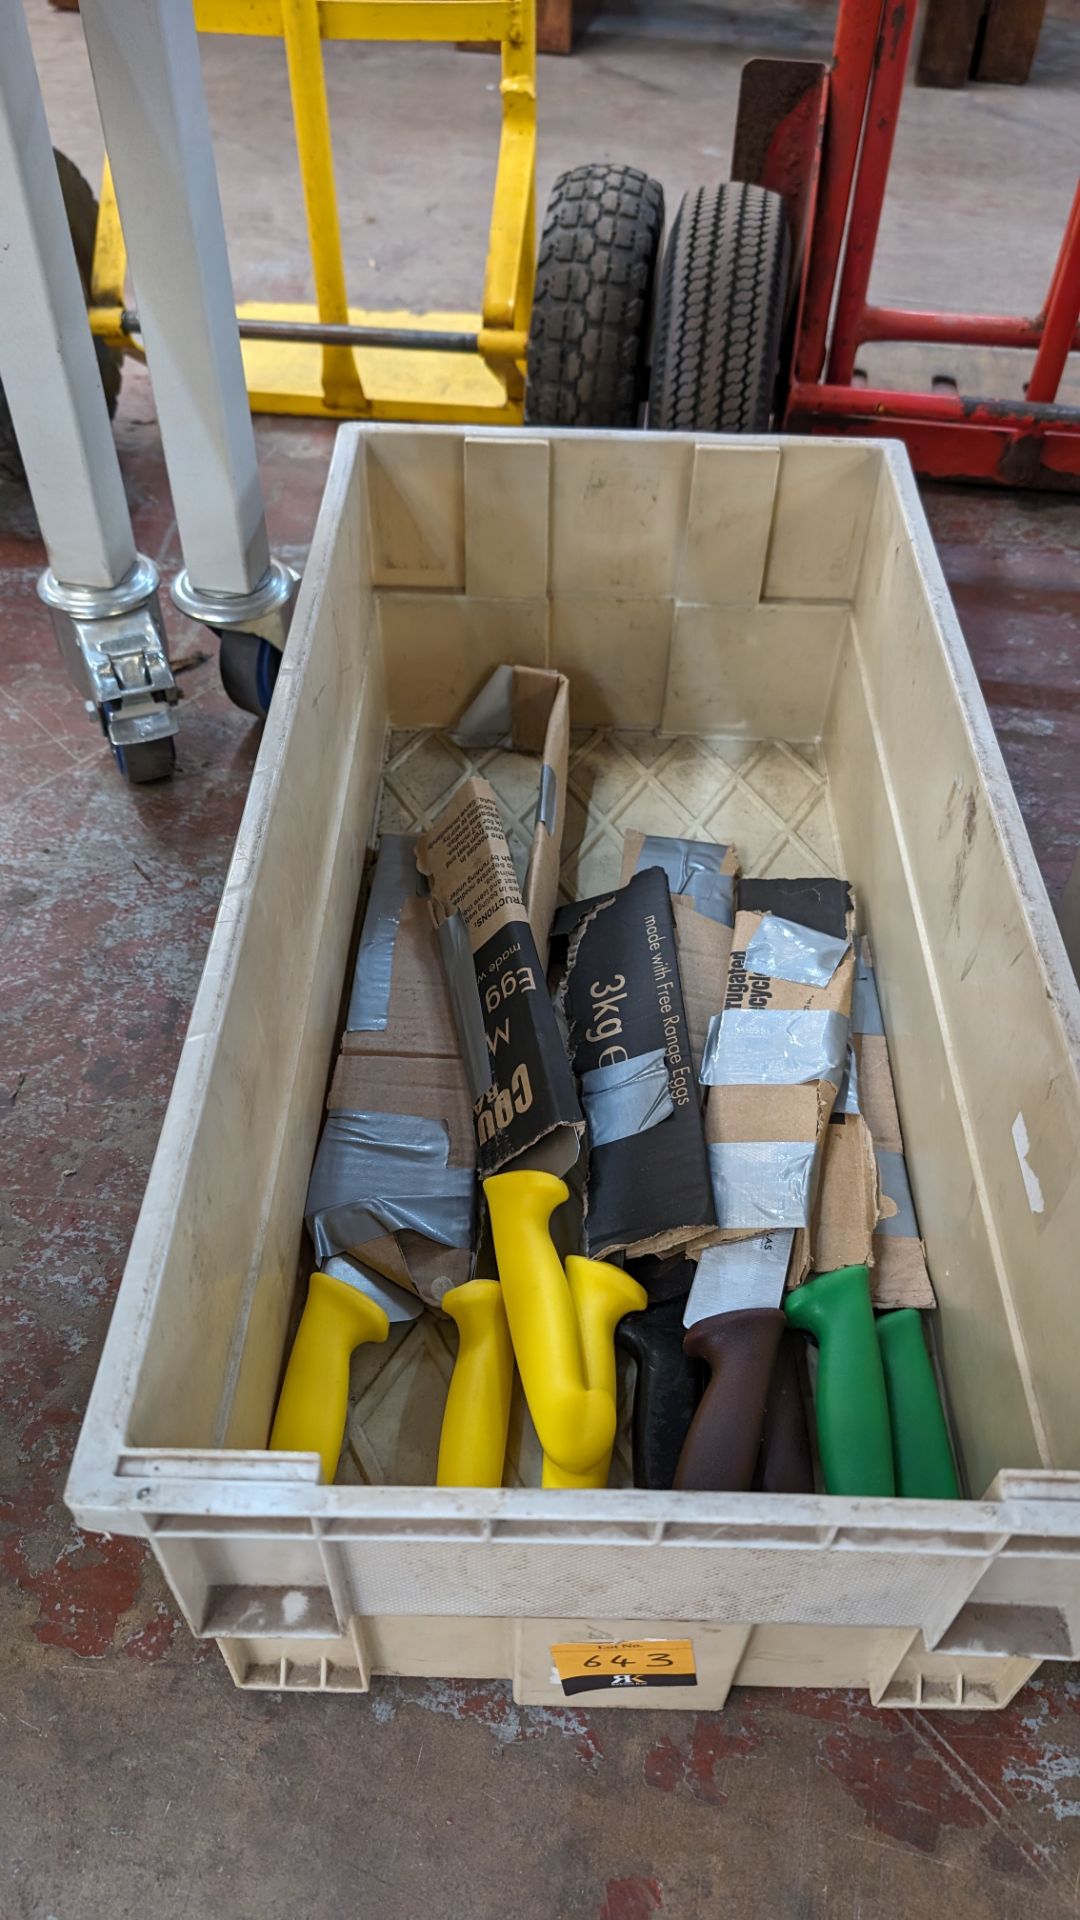 The contents of a crate of chefs knives